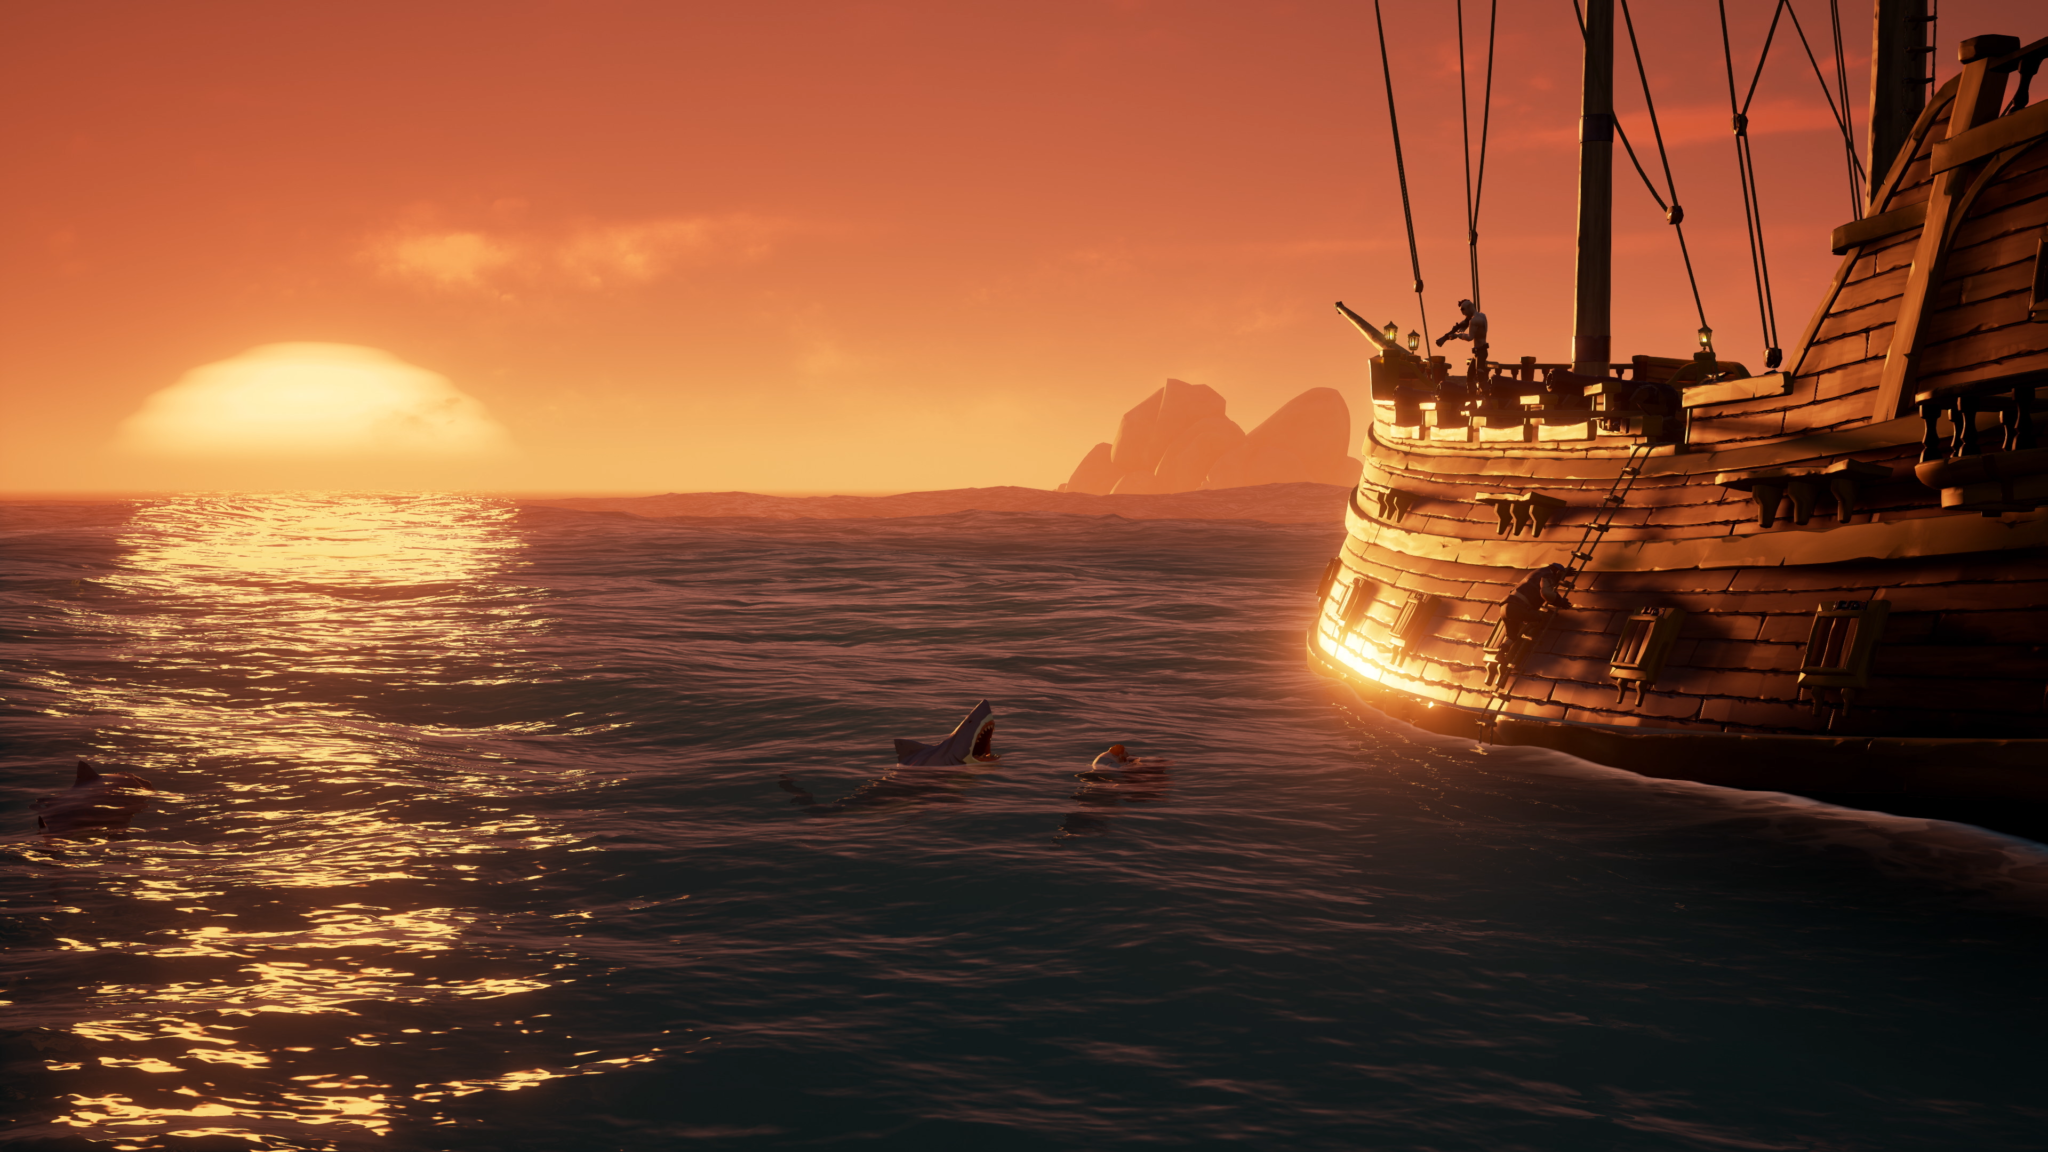 Sea of Thieves Arrives March 20, Pre-orders Available Now